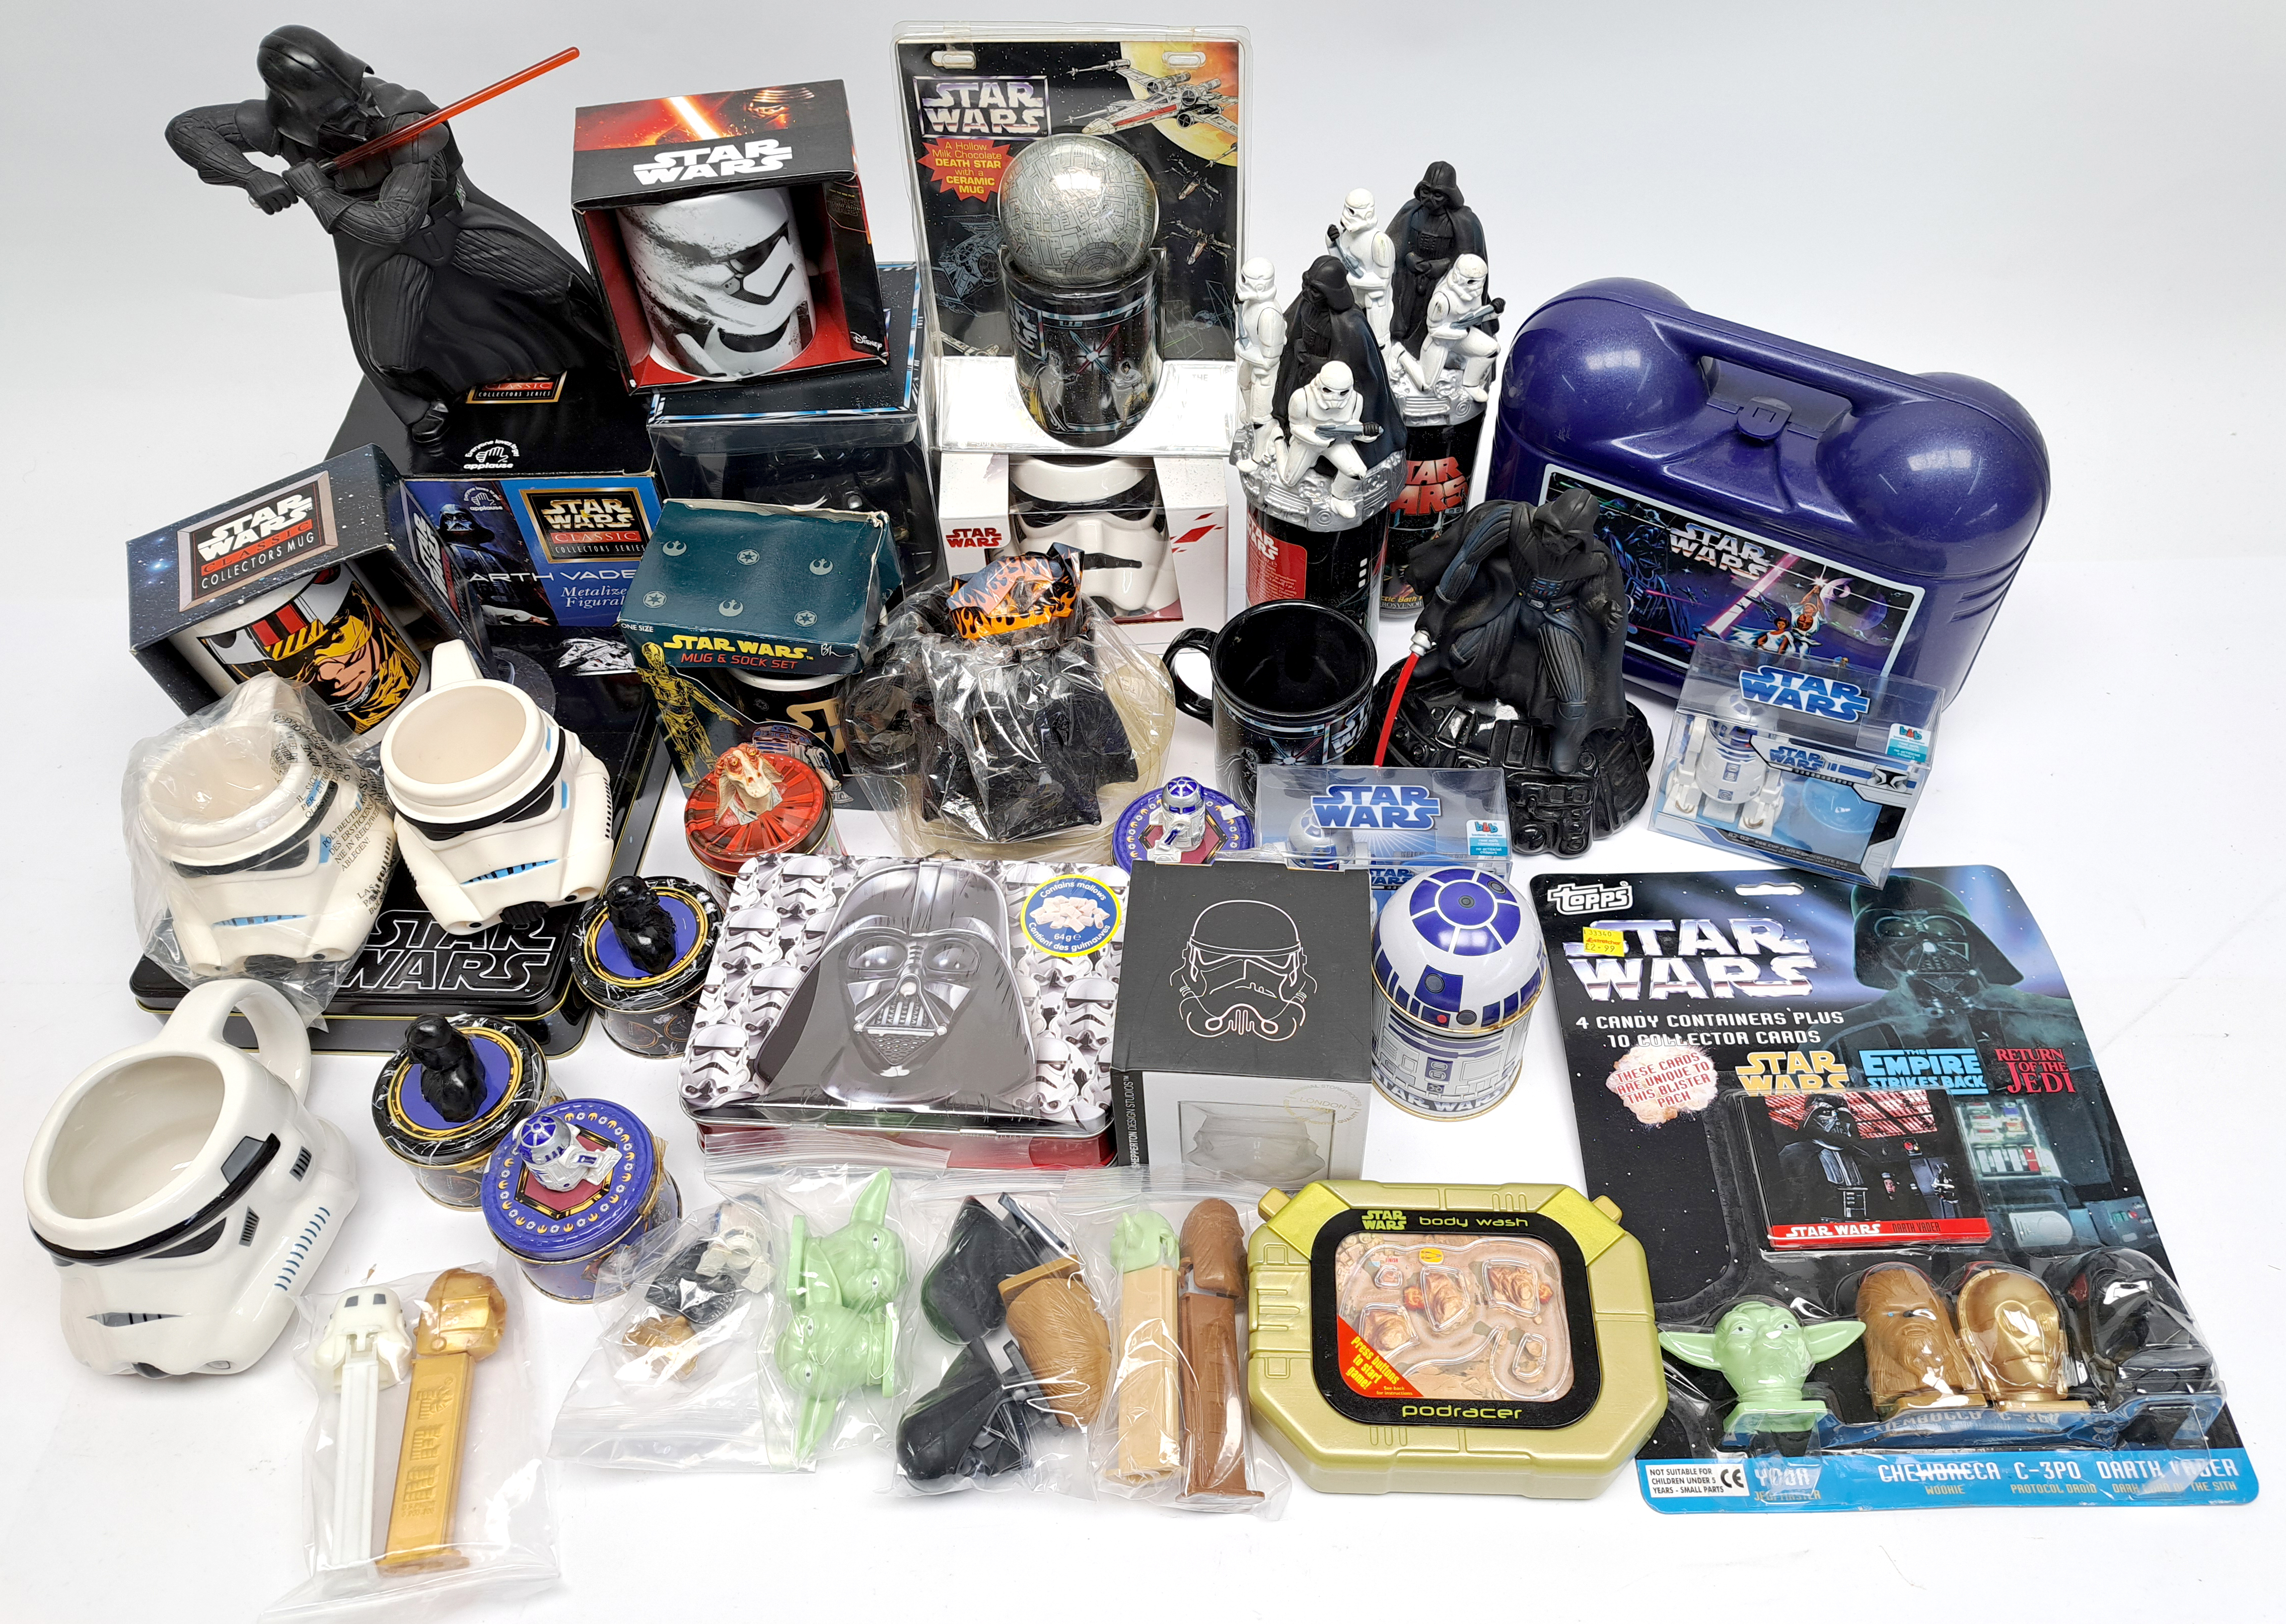 Topps Star Wars Candy heads, promotional Food items & assorted figural mugs. Good to excellent.